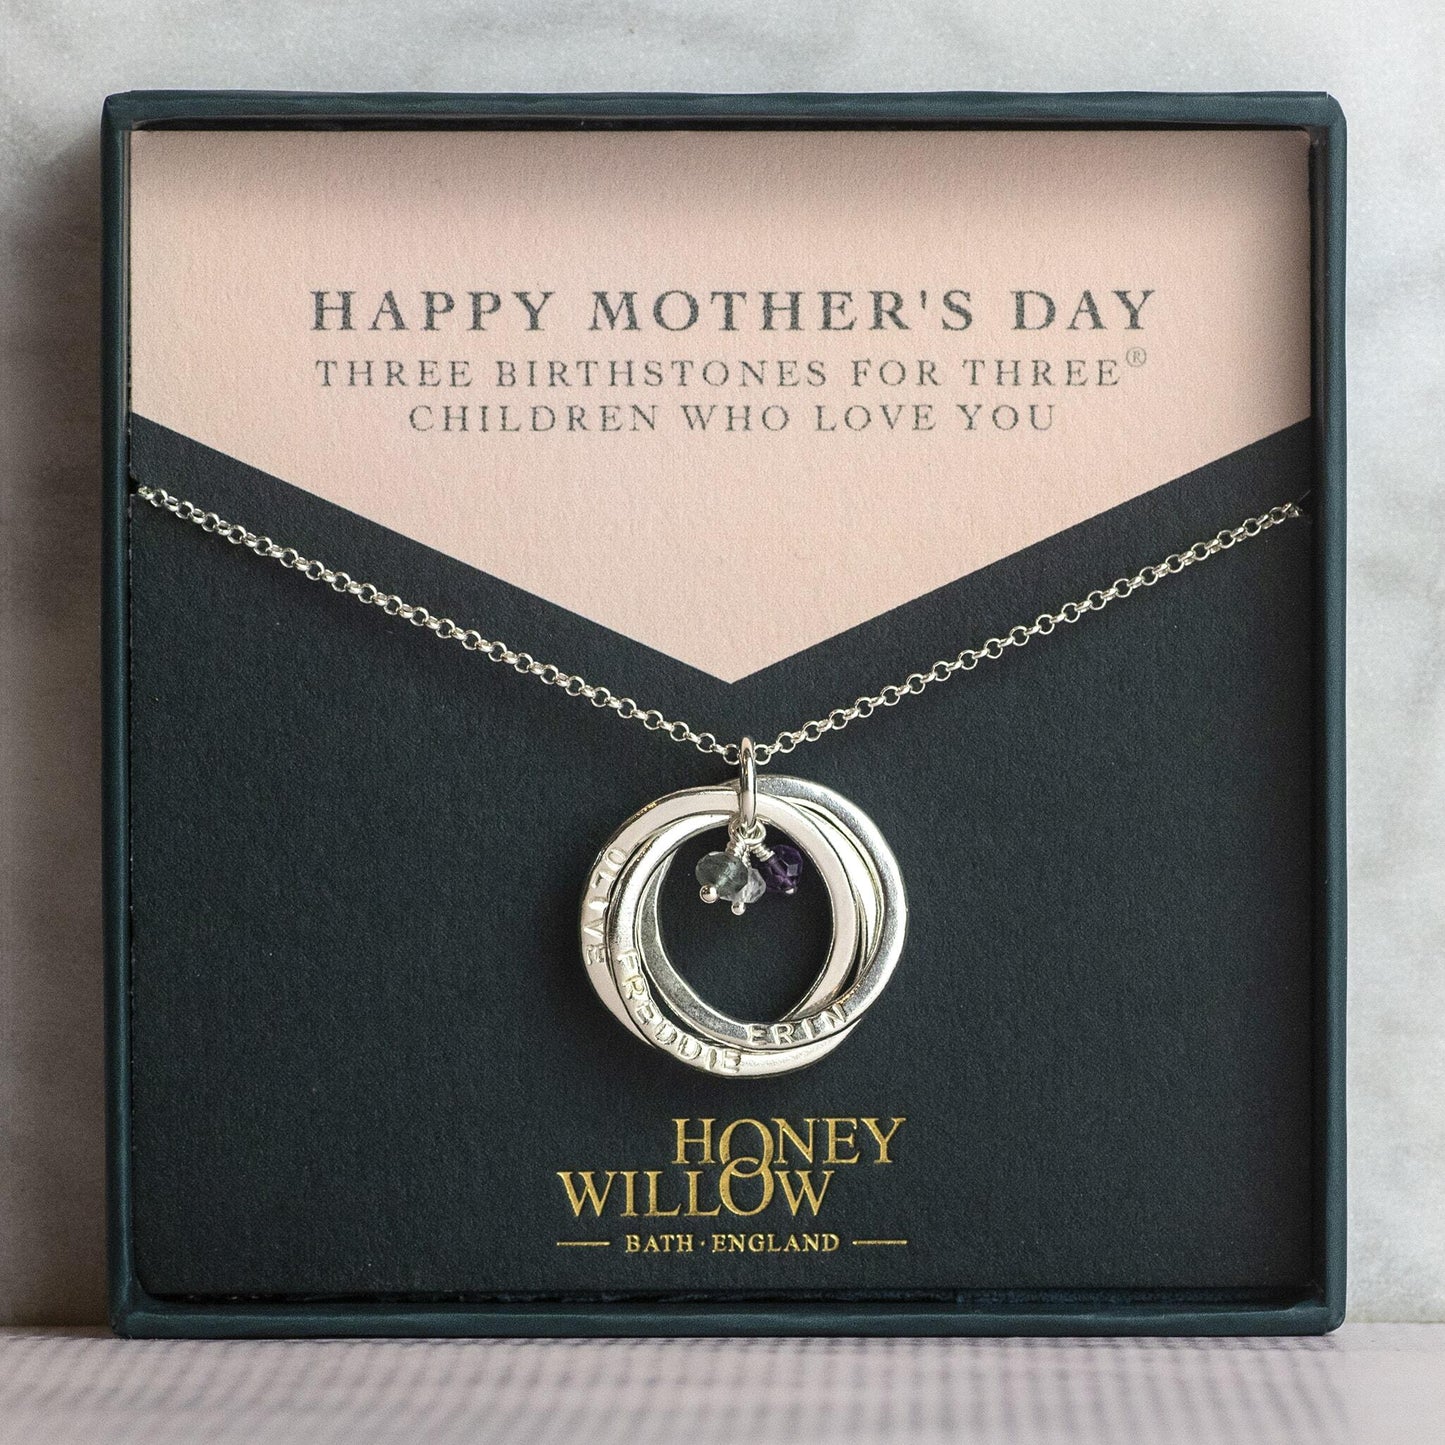 Mother's Day Gift - 3 Birthstones for 3® Children - Personalised Silver 3 Link Necklace - Large